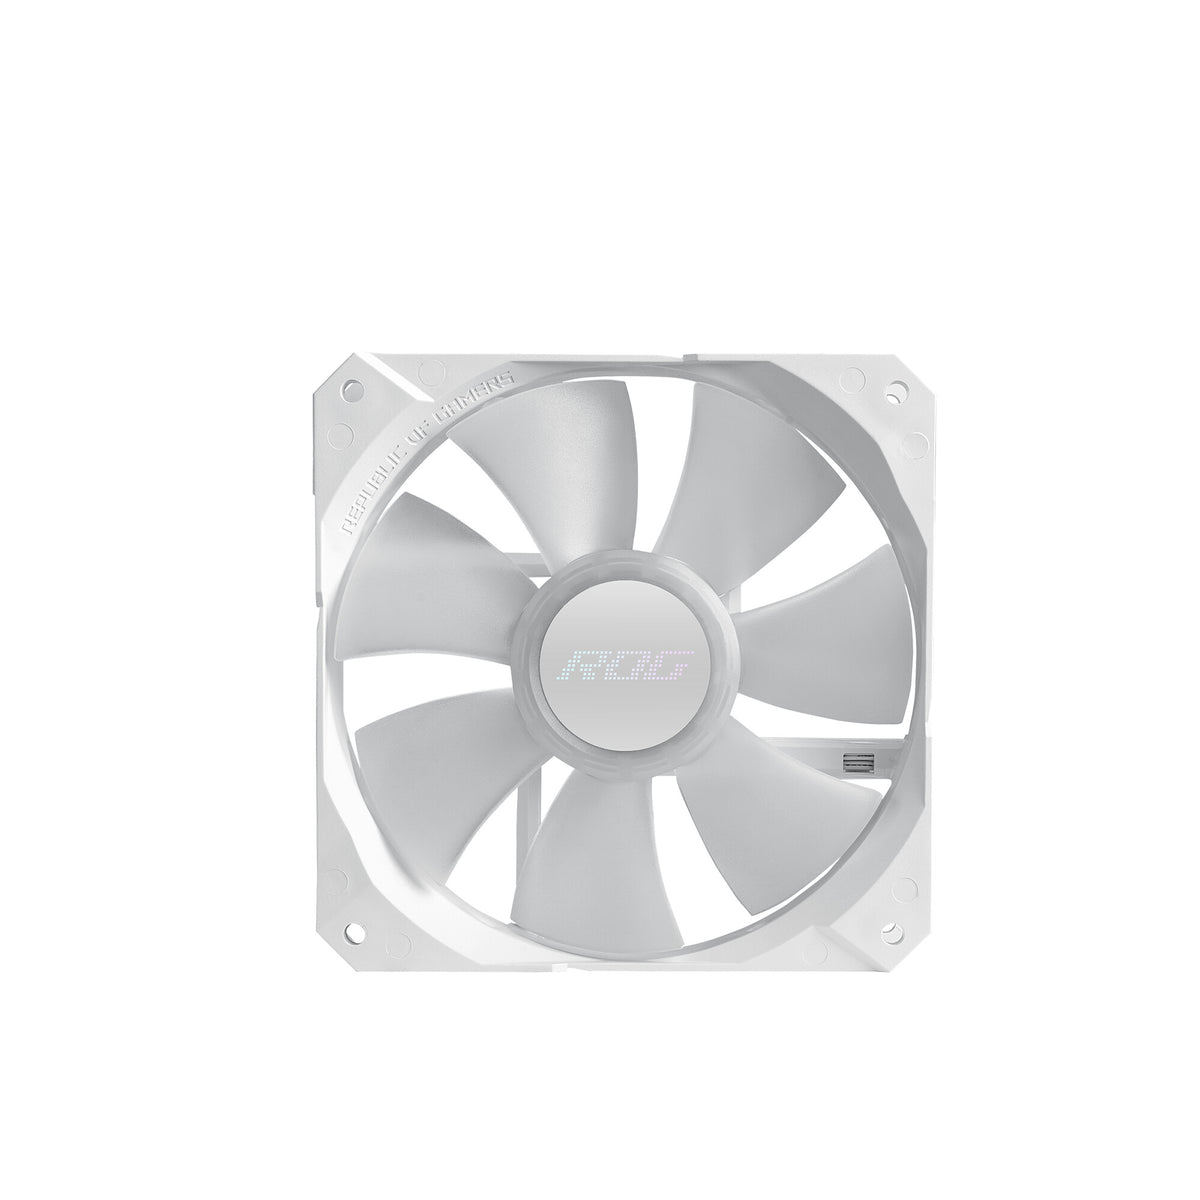 ASUS ROG STRIX LC II 240 ARGB &quot;White Edition&quot; - All-in-one Liquid Processor Cooler in White - 240mm